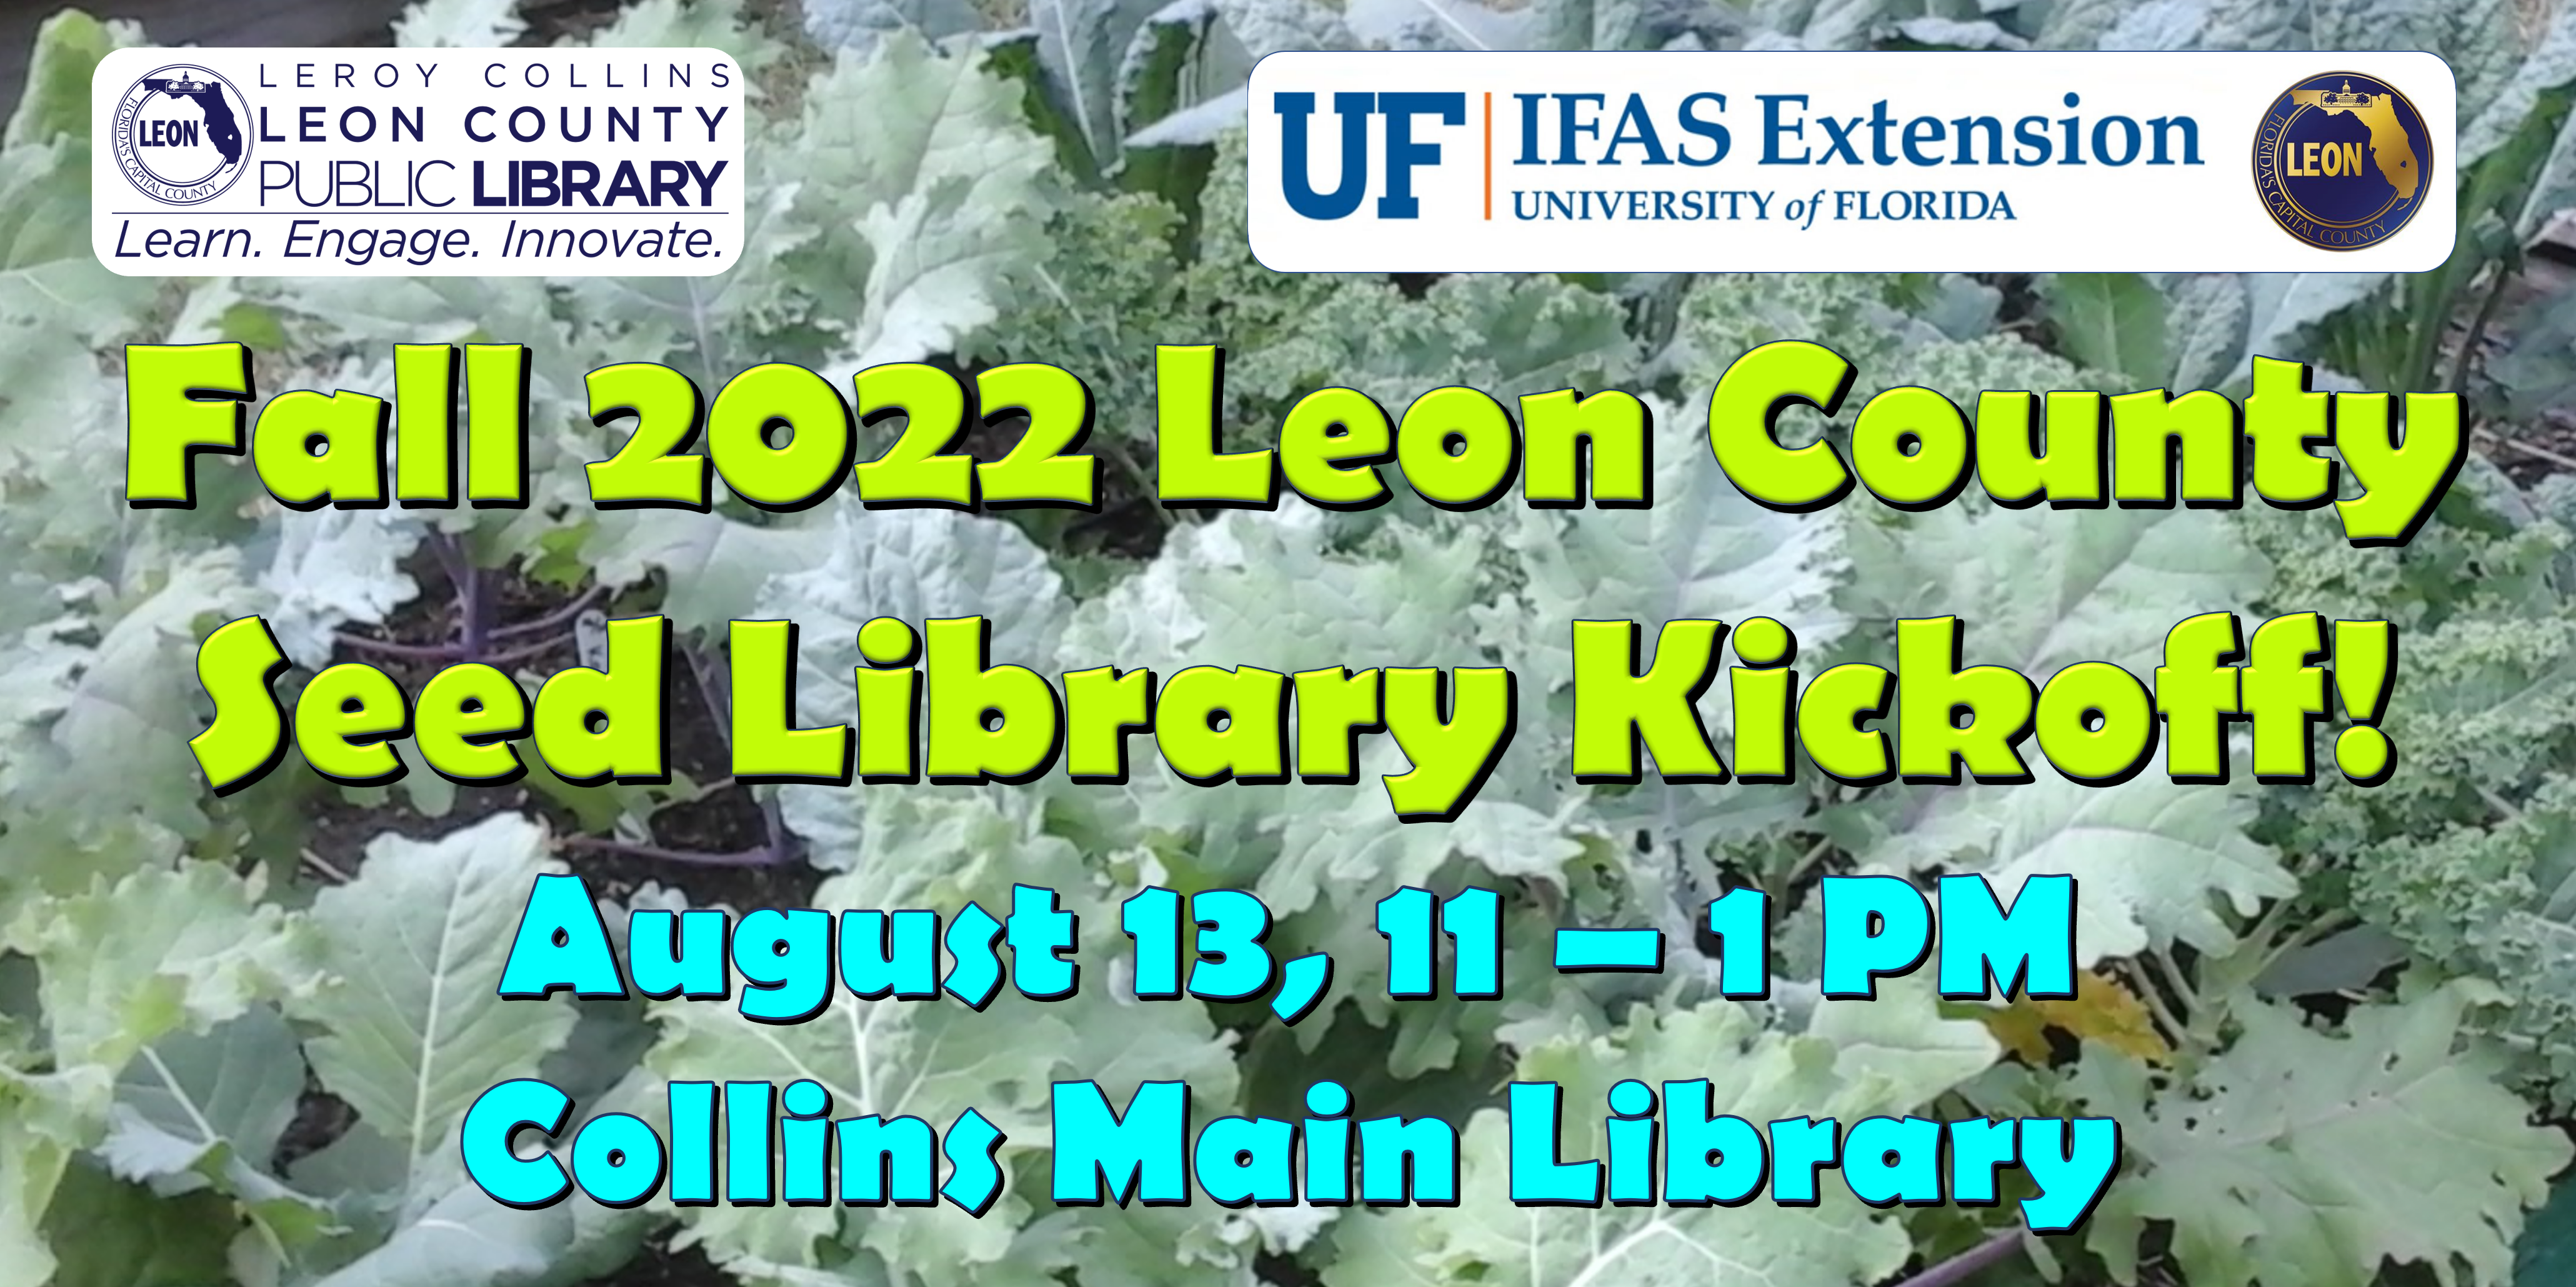 https://nwdistrict.ifas.ufl.edu/hort/files/2022/07/Fall-2022-Seed-Library-Kickoff-Image.png